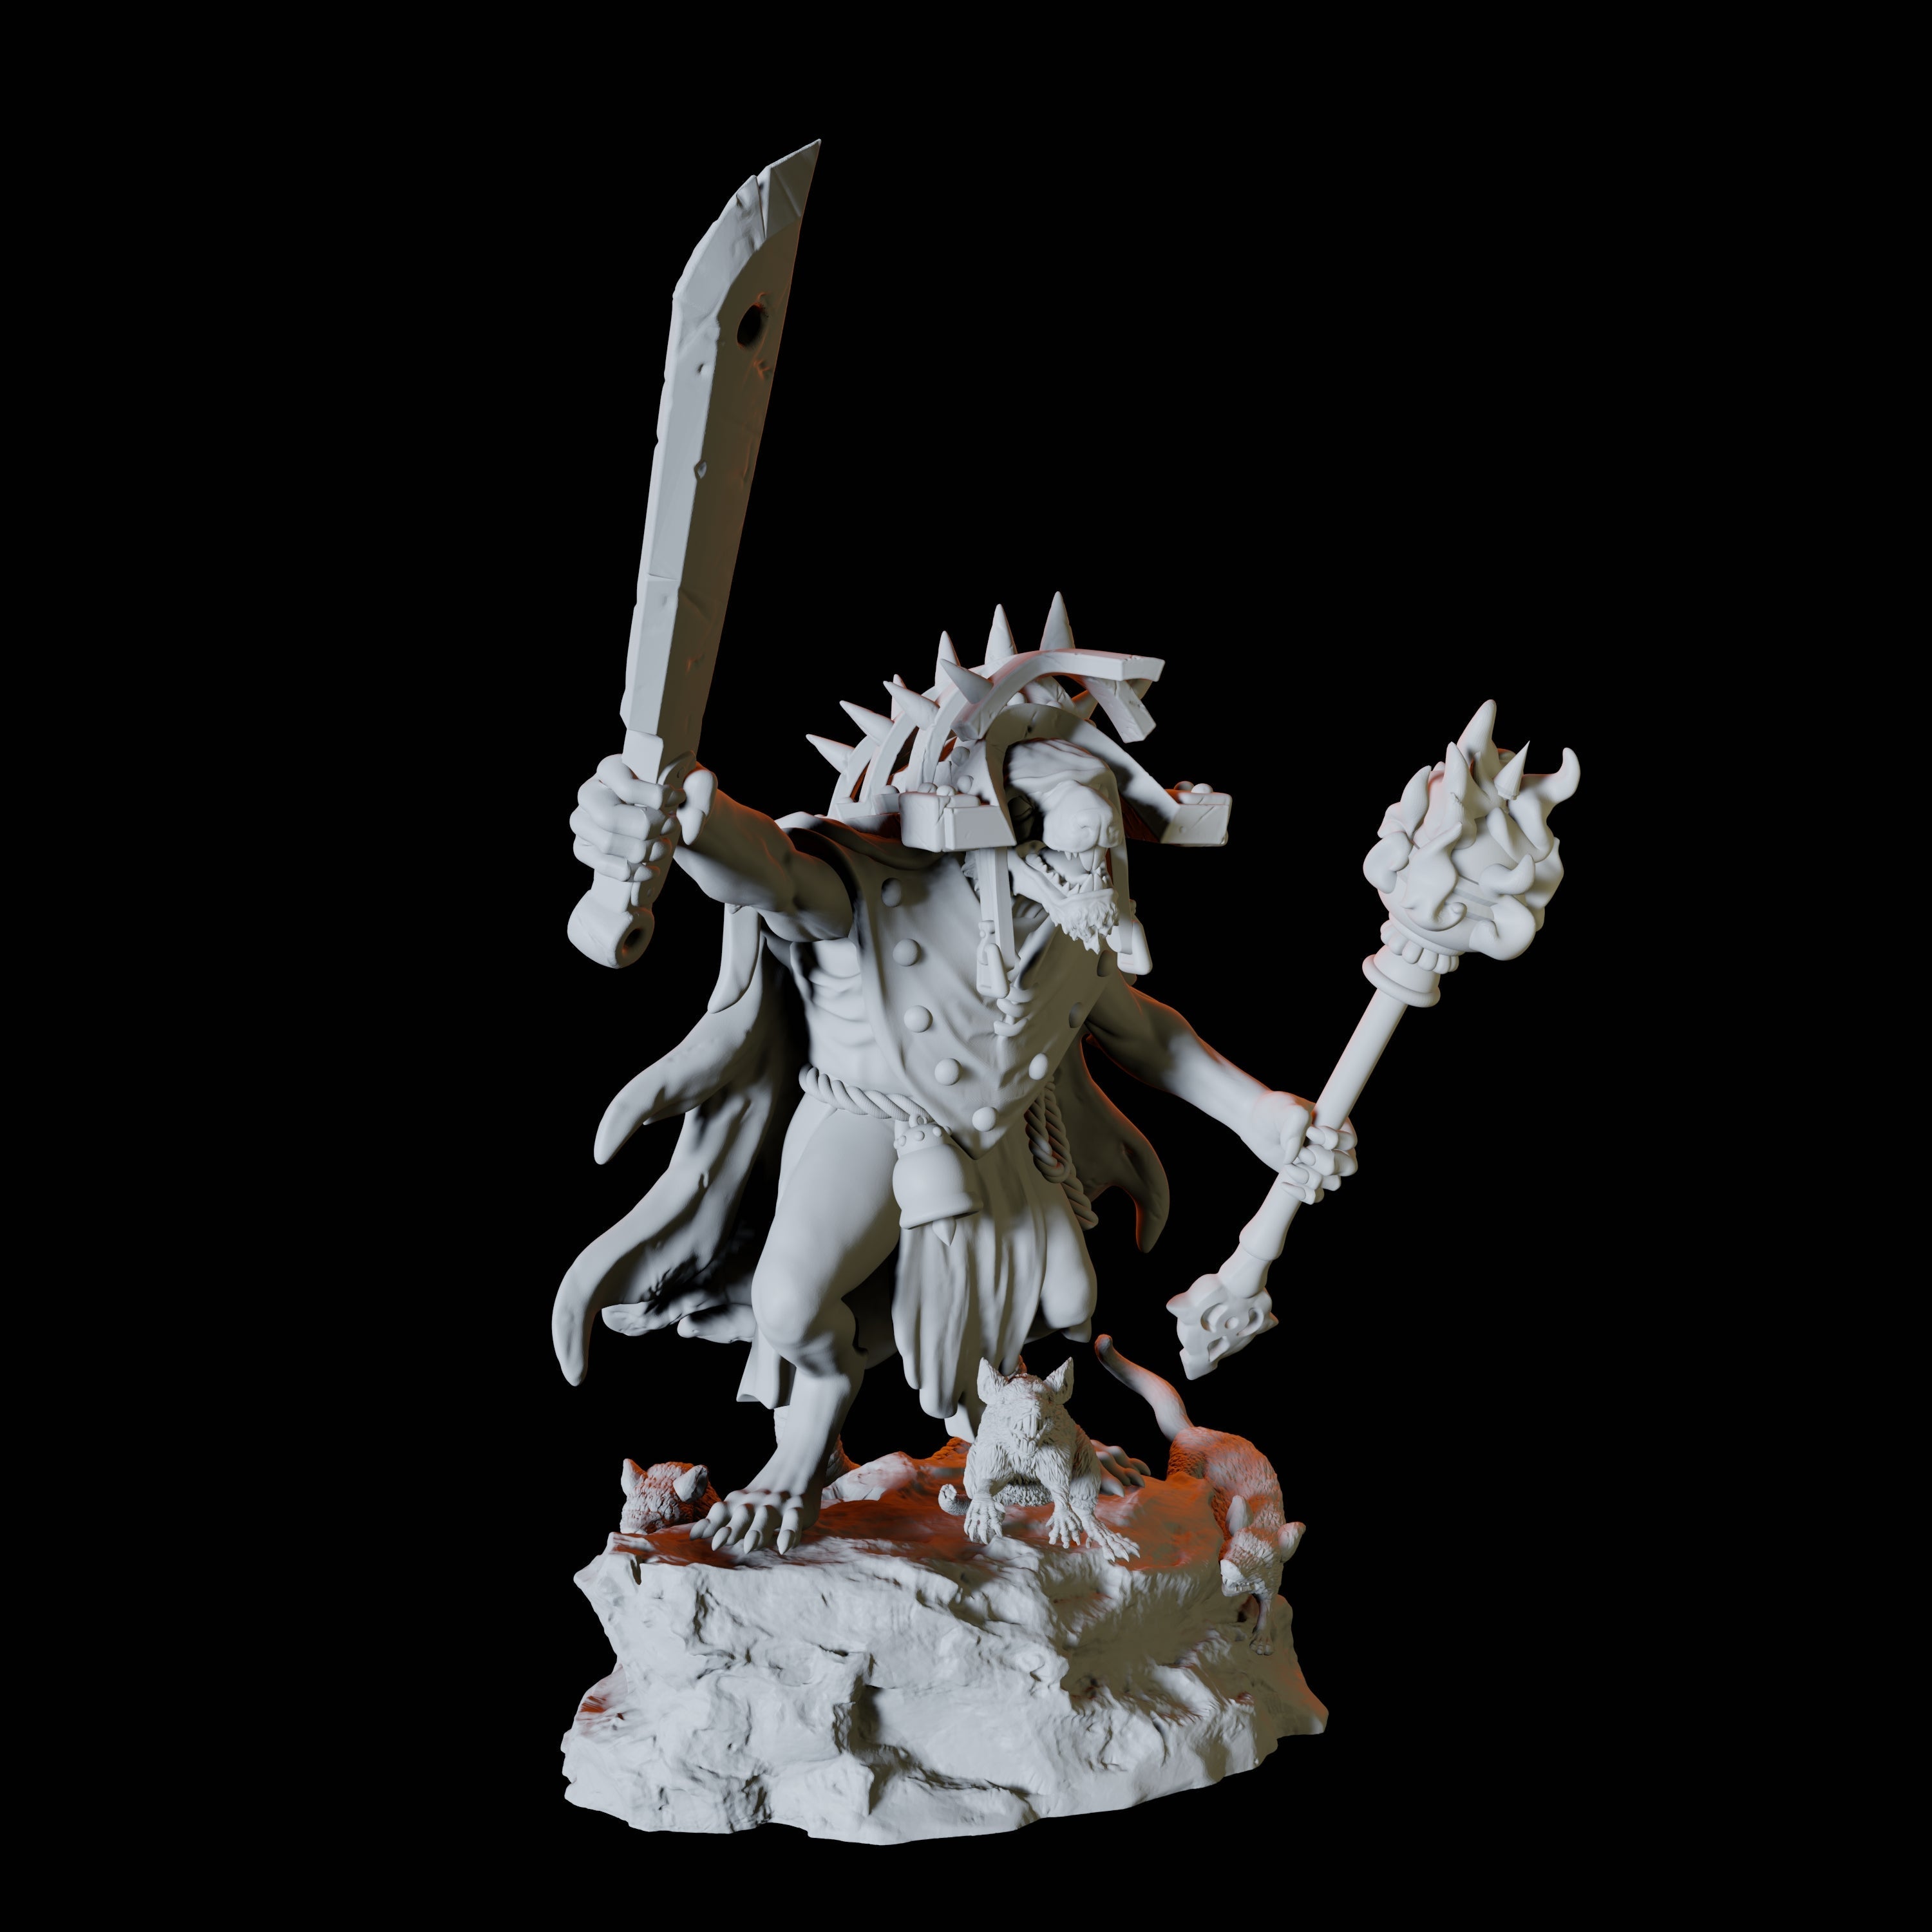 Four Crusader Ratfolk Miniature for Dungeons and Dragons, Pathfinder or other TTRPGs